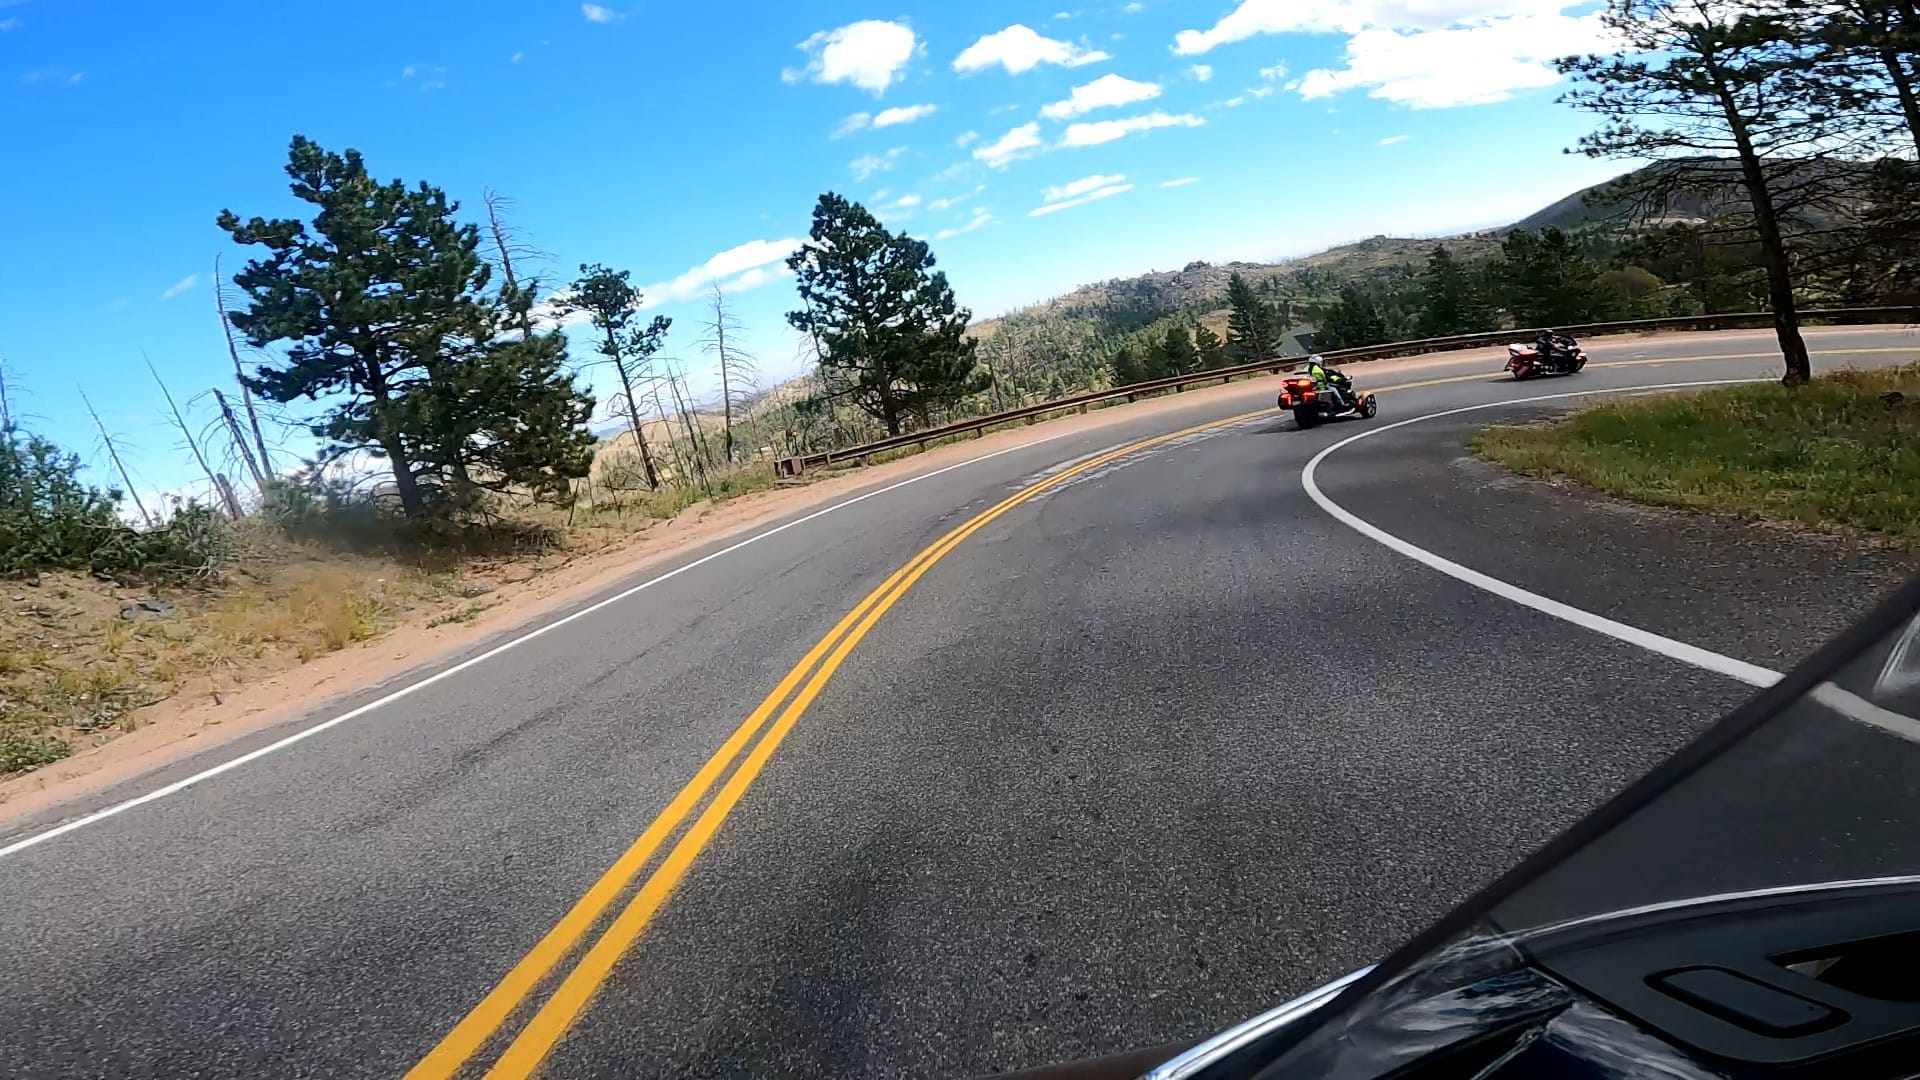 Northern Colorado Indian Motorcycle Riders Group Rist Canyon Ride